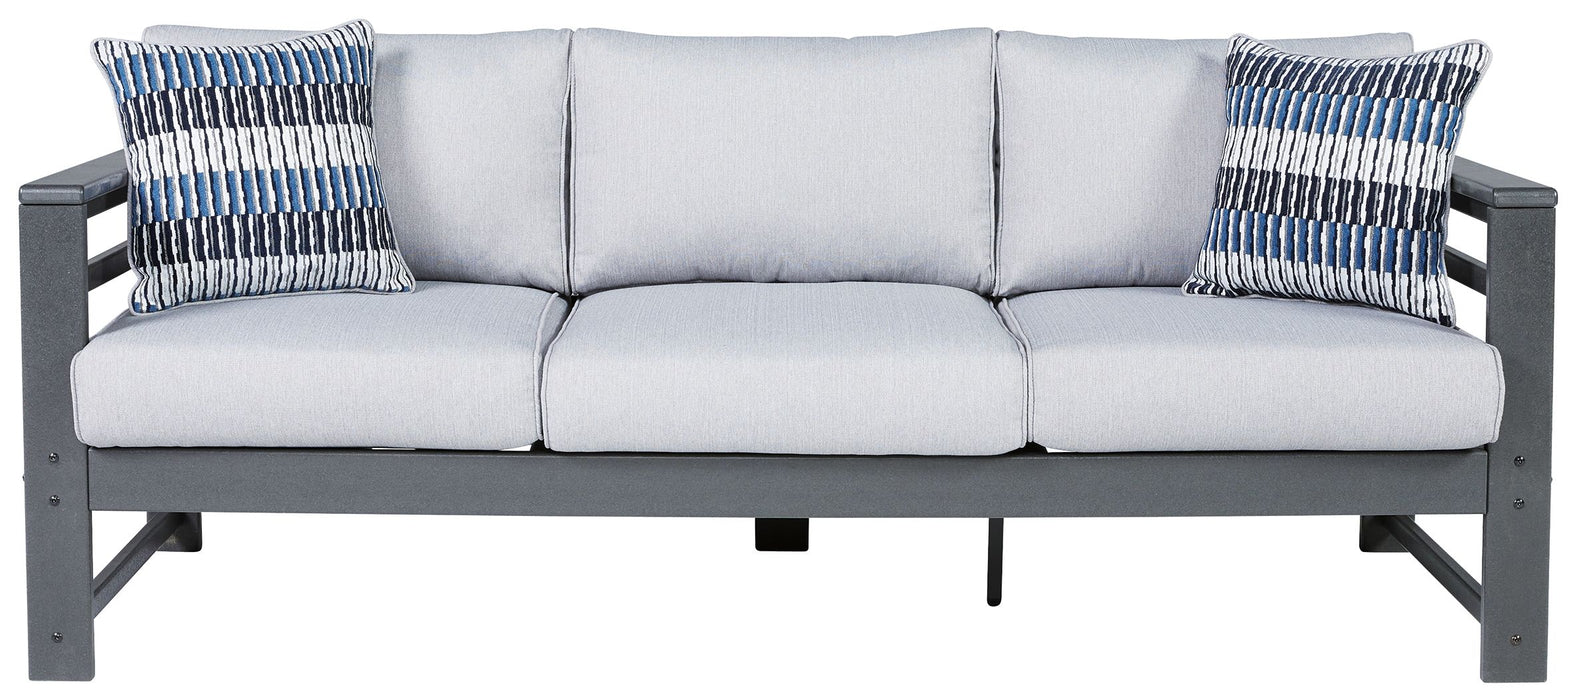 Amora - Charcoal Gray - Sofa With Cushion Unique Piece Furniture